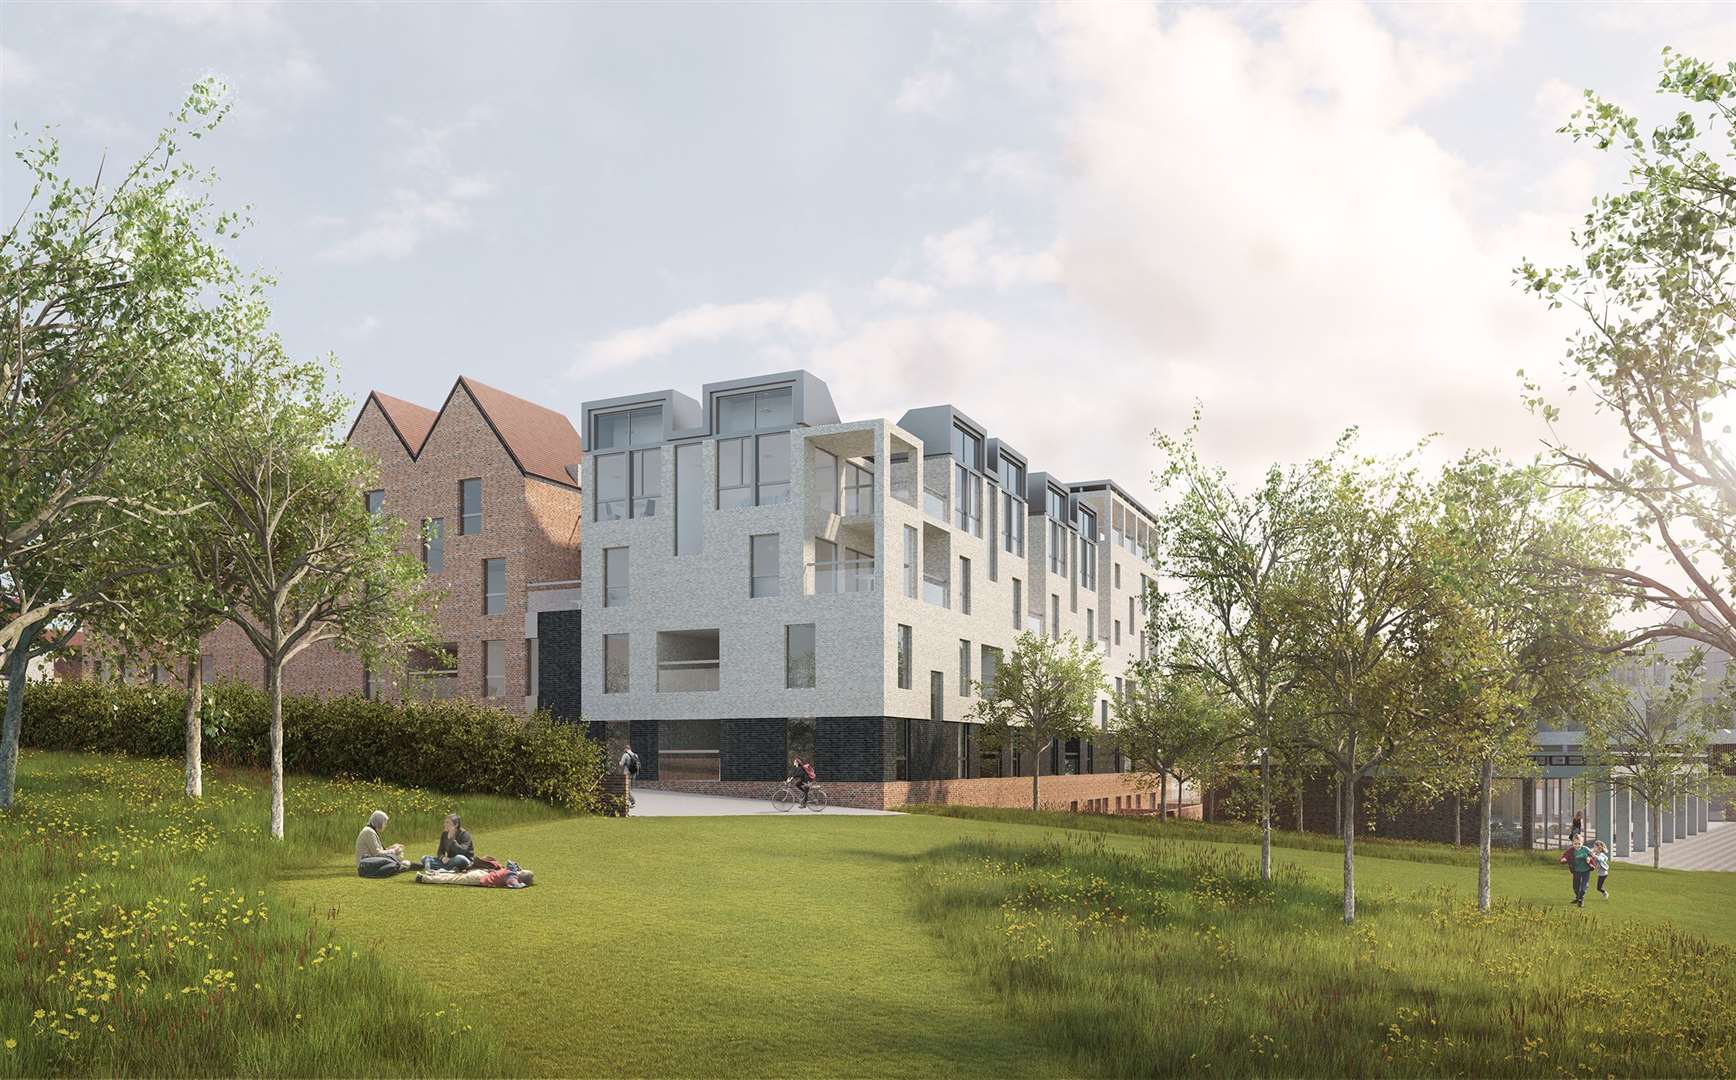 An artist's impression of part of the planned Mountfield Park development in Canterbury